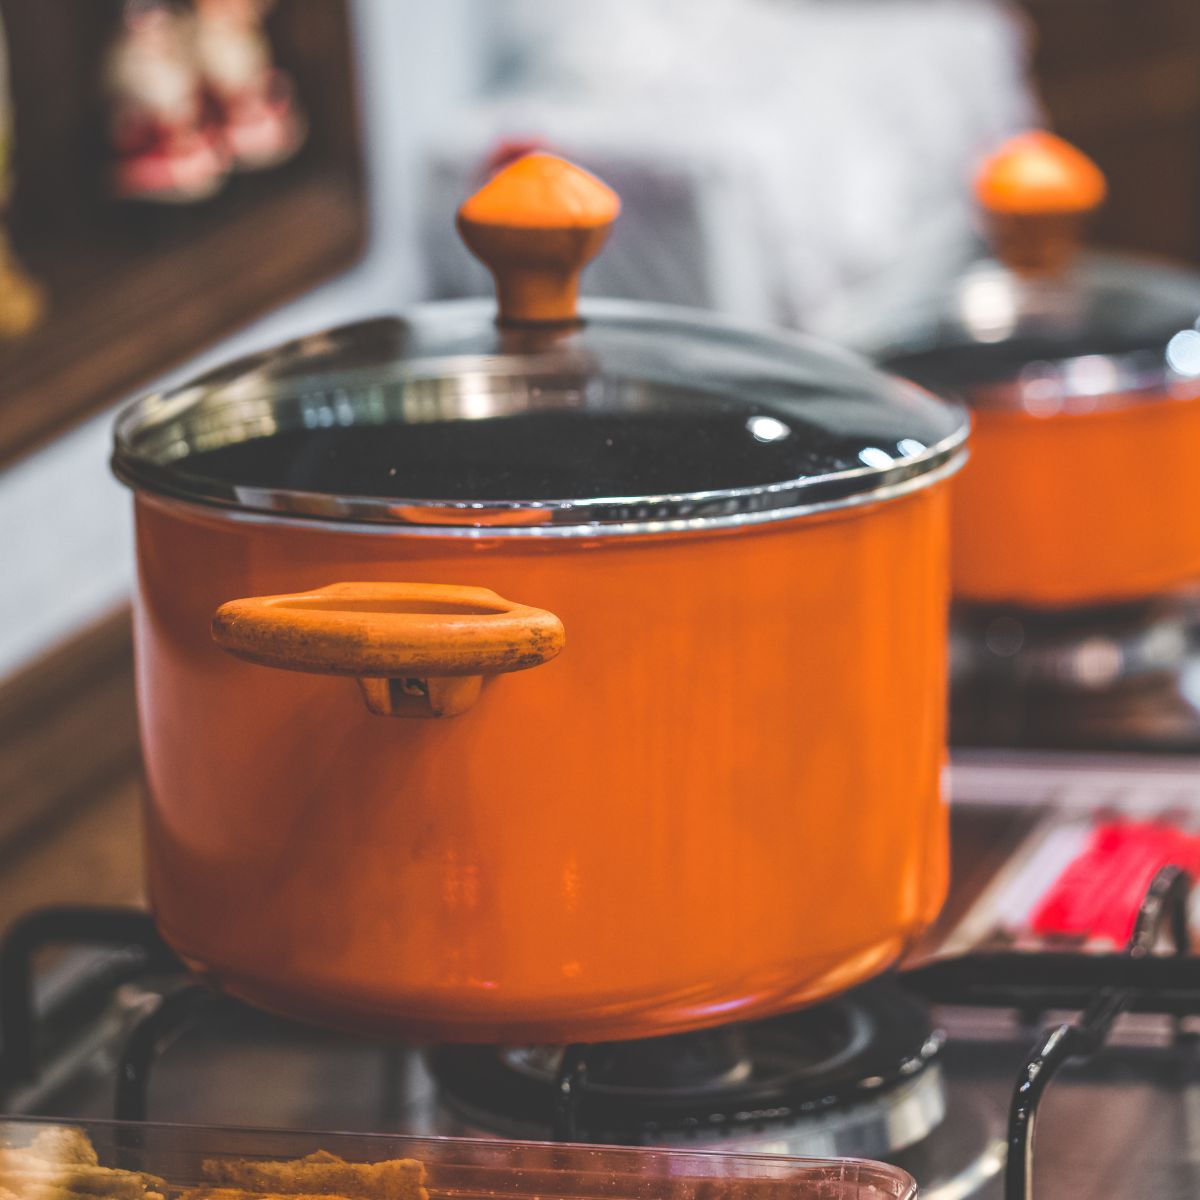 An orange pot on the stovetop is cooking a family dinner.